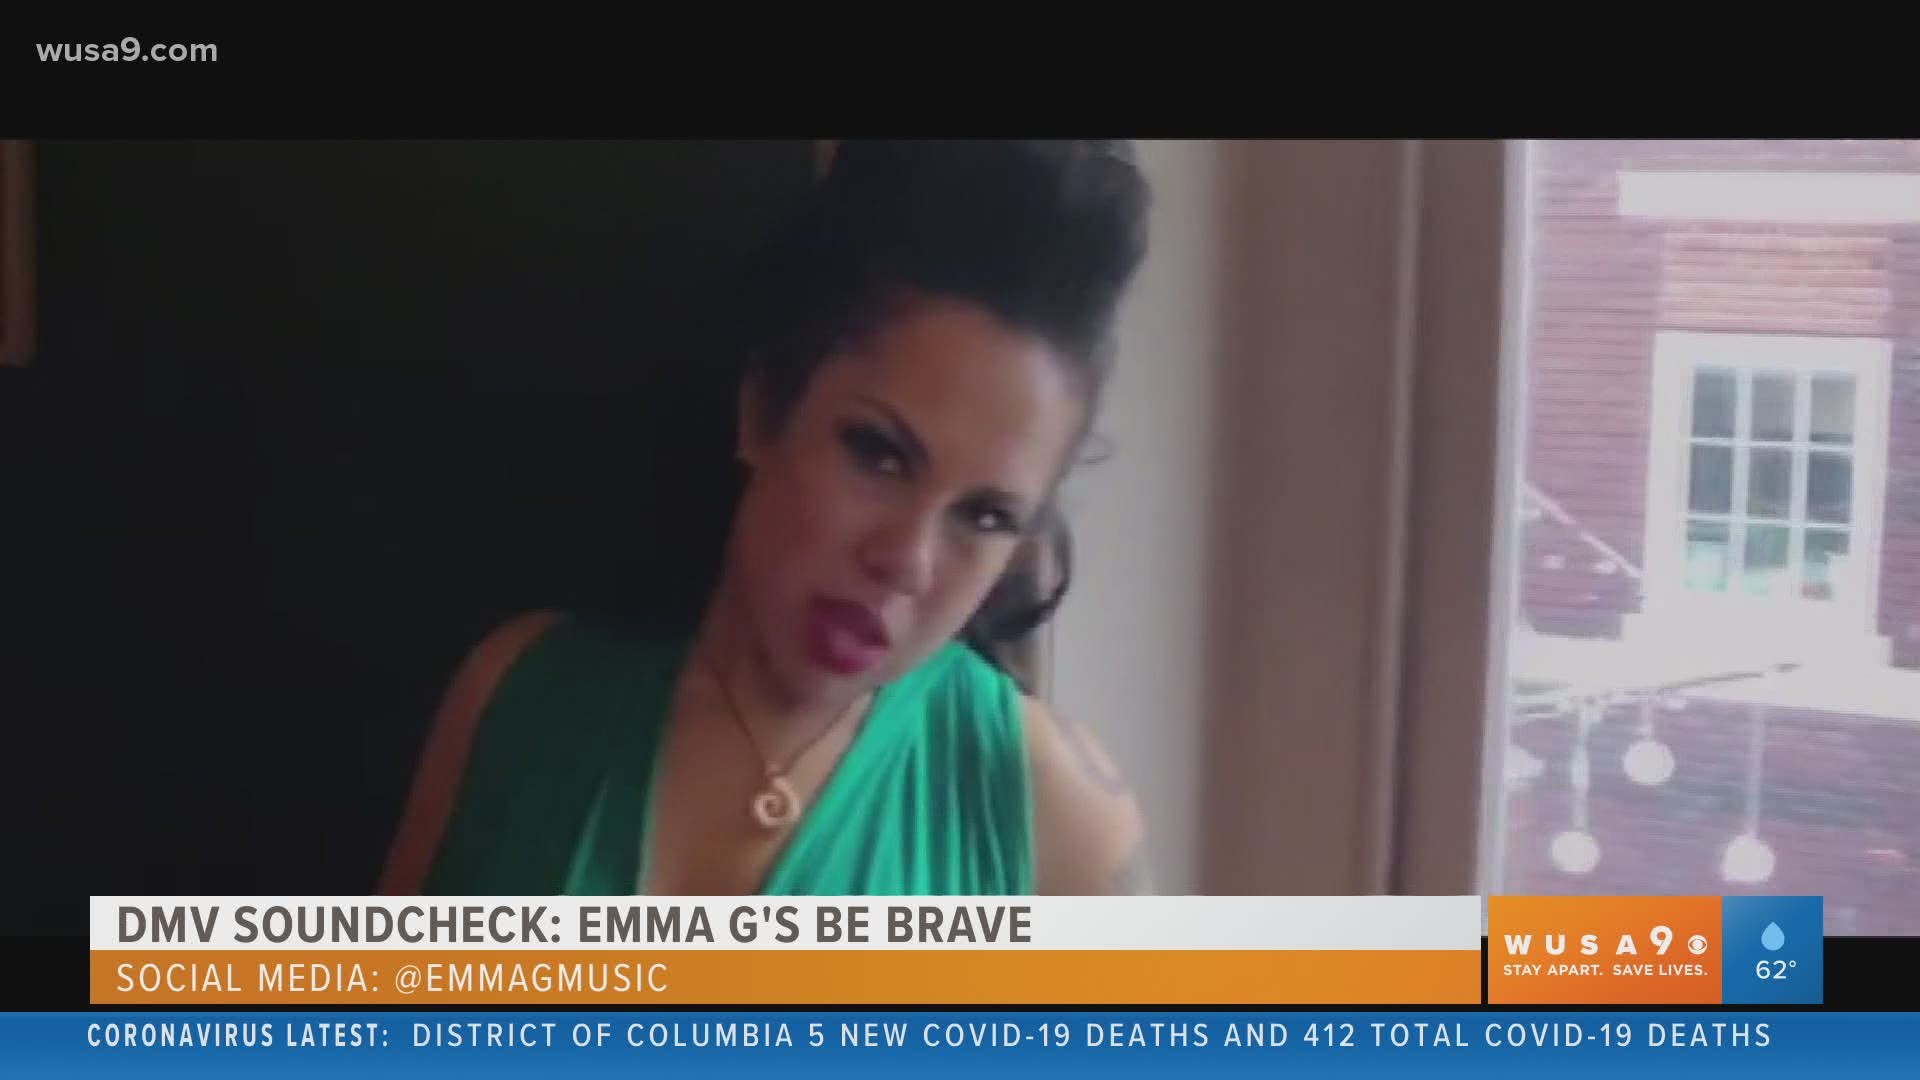 DC based singer/songwriter Emma G includes a message of love, vulnerability, empowerment & strength in her music. This segment is sponsored by entertainment.dc.gov.